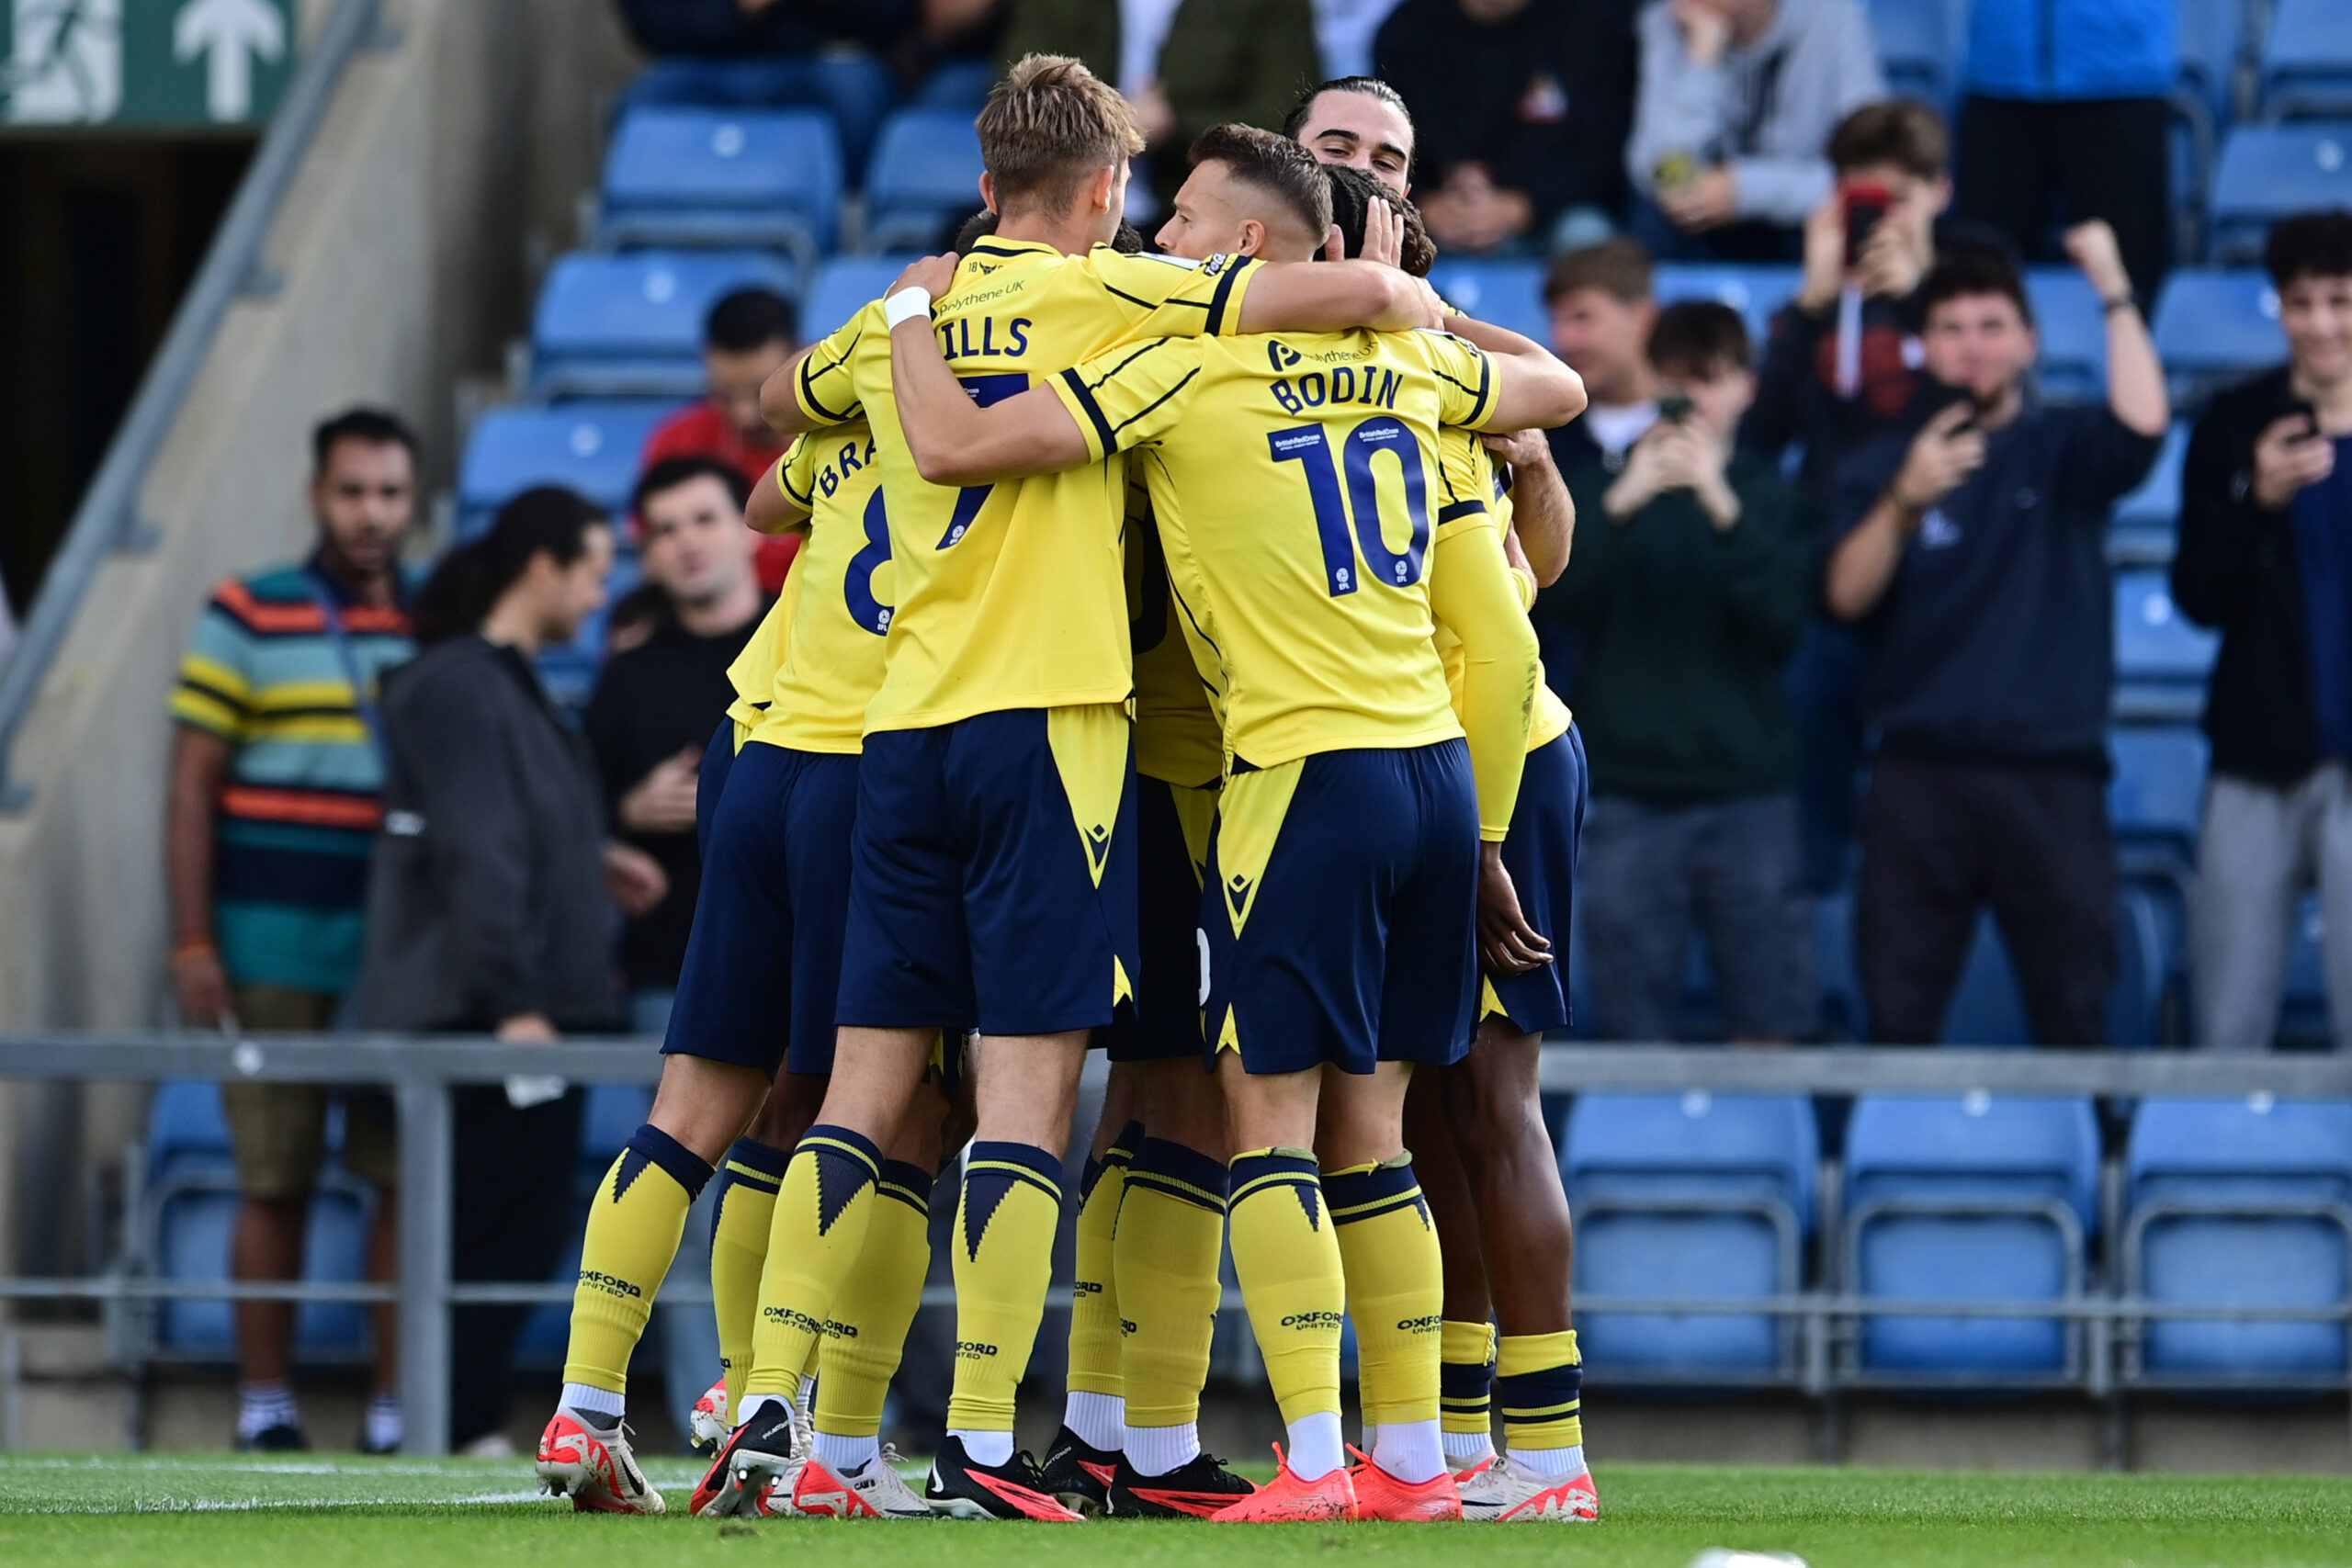 Oxford United Extend Partnership with Catapult Sports - News - Oxford United